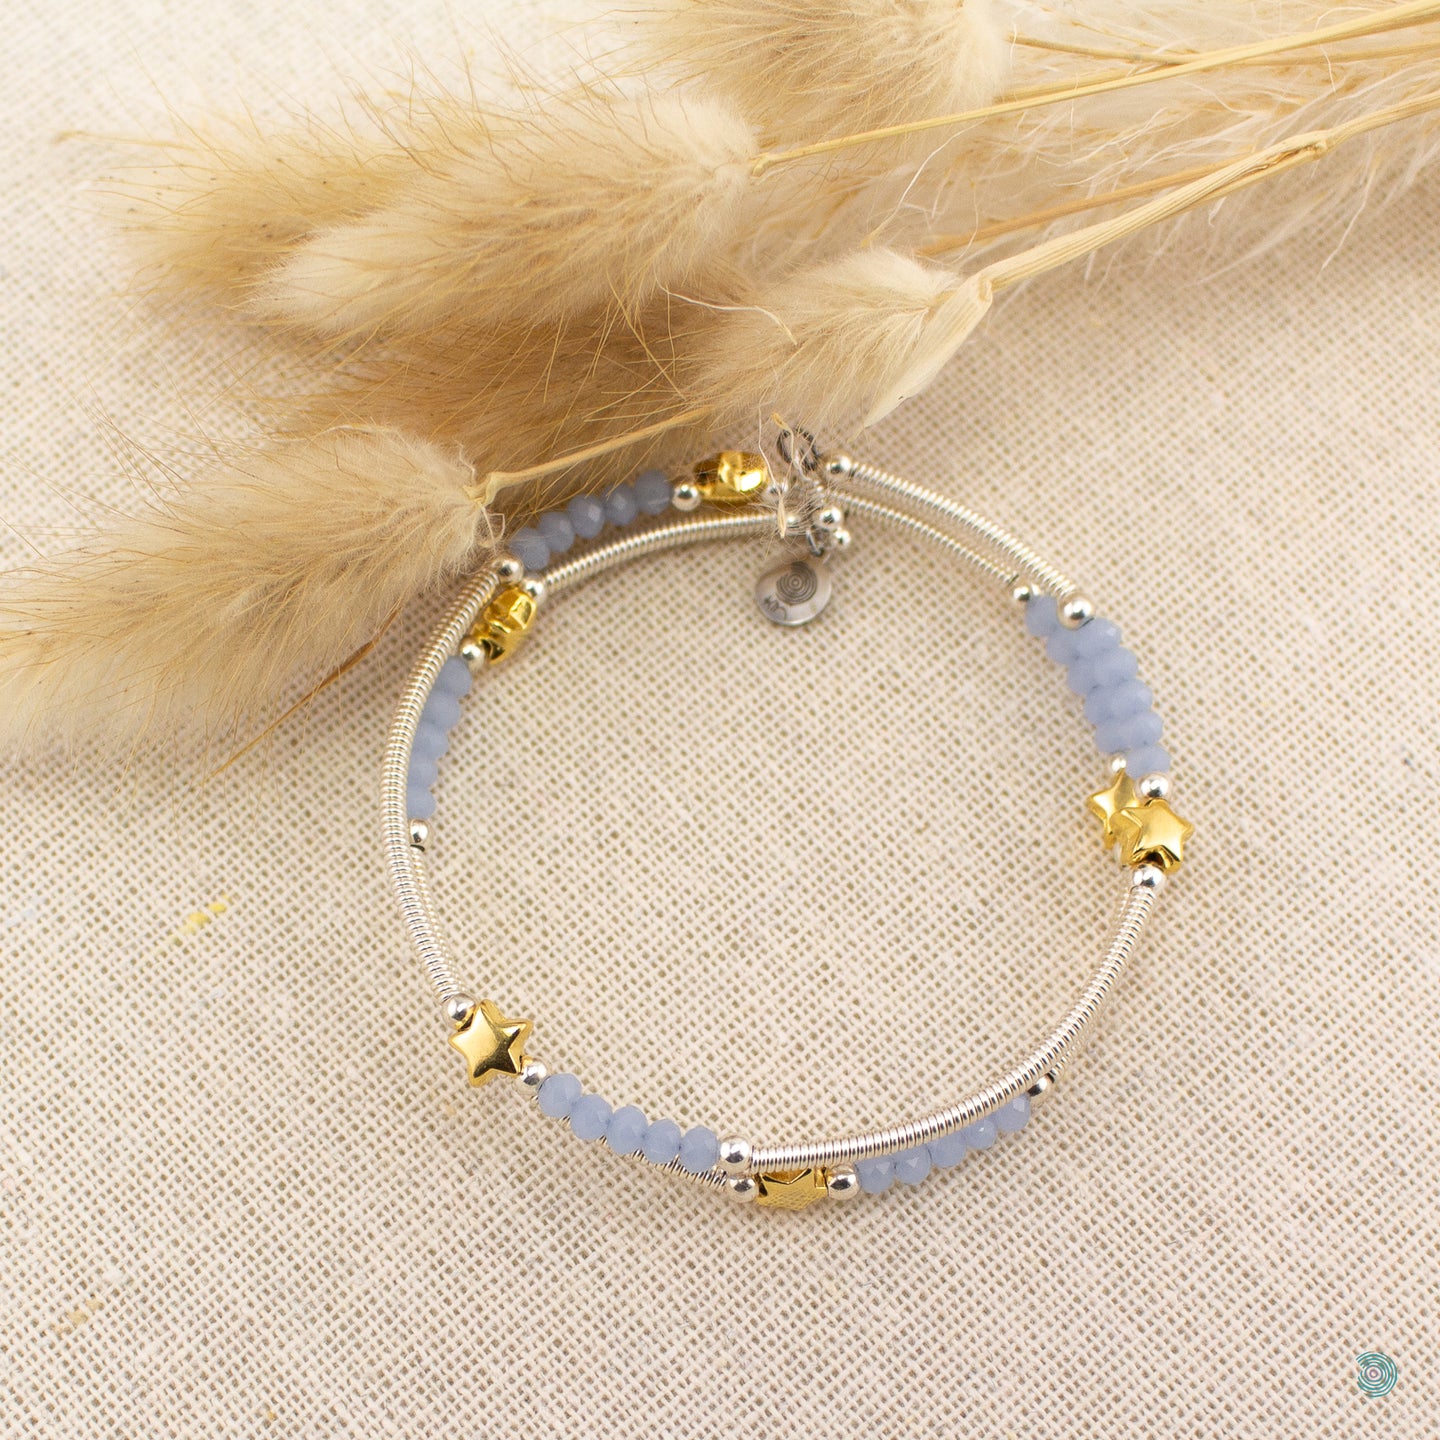 Hand wrapped silver filled tubes, blue crystal and gold plate star wrap around bracelet. Bangle style bracelet, one size flexible that wraps around the wrist and sits in place. Designed and Handmade in Dingle, Ireland.